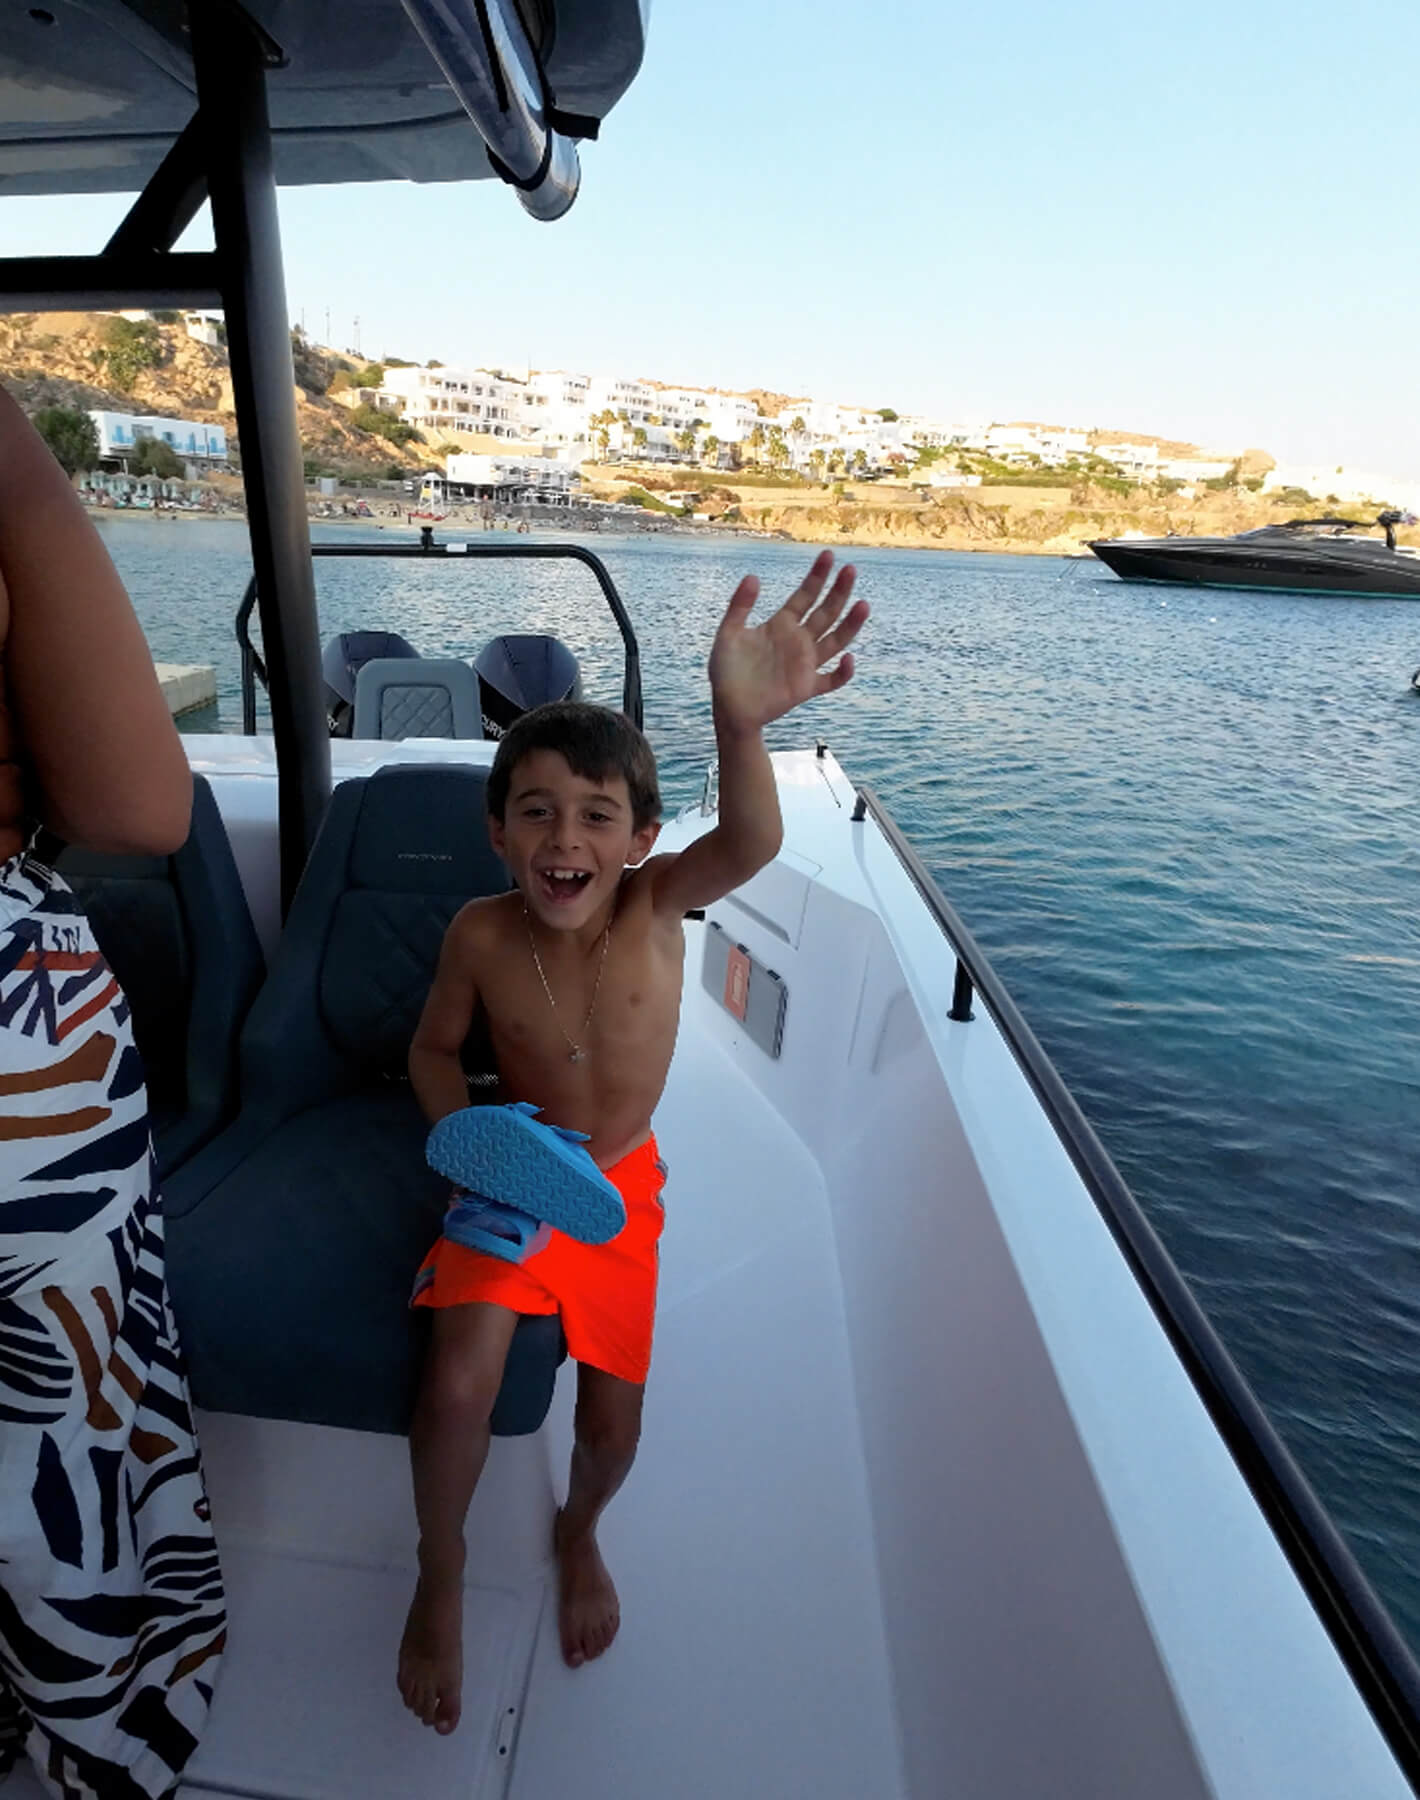 Pure joy in the Aegean: A happy boy waves from Cali's Axopar boat, surrounded by summer vibes among the Cycladic islands.